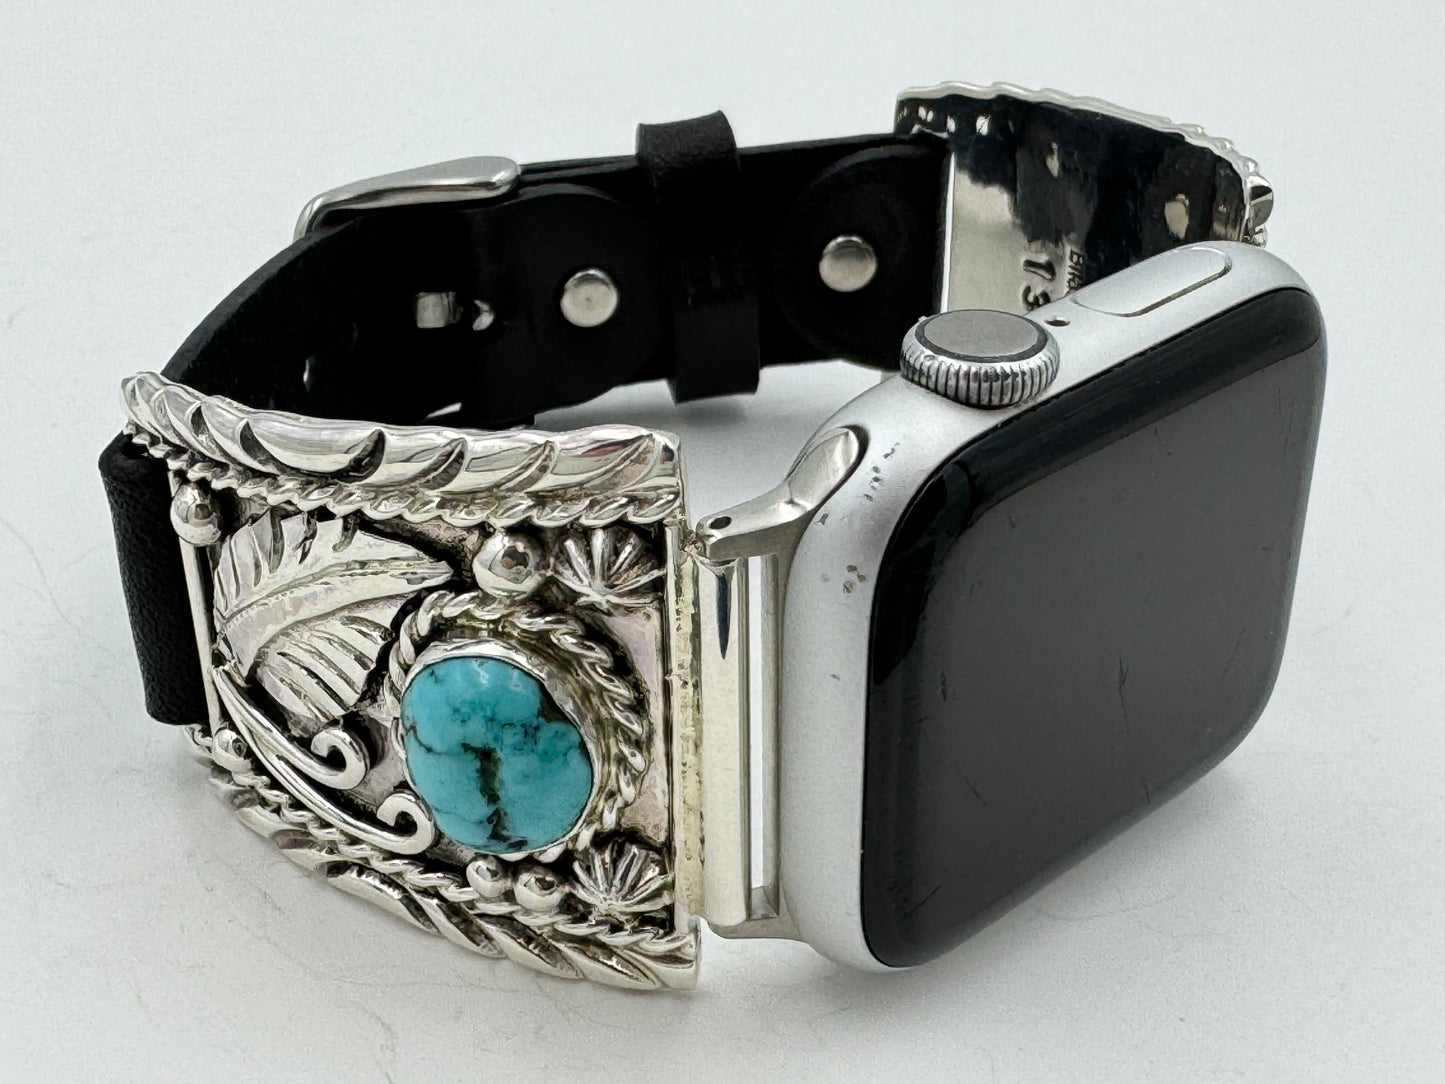 Ronnie Spencer 38/40/41mm Trapezoid Sterling Silver and Turquoise #137